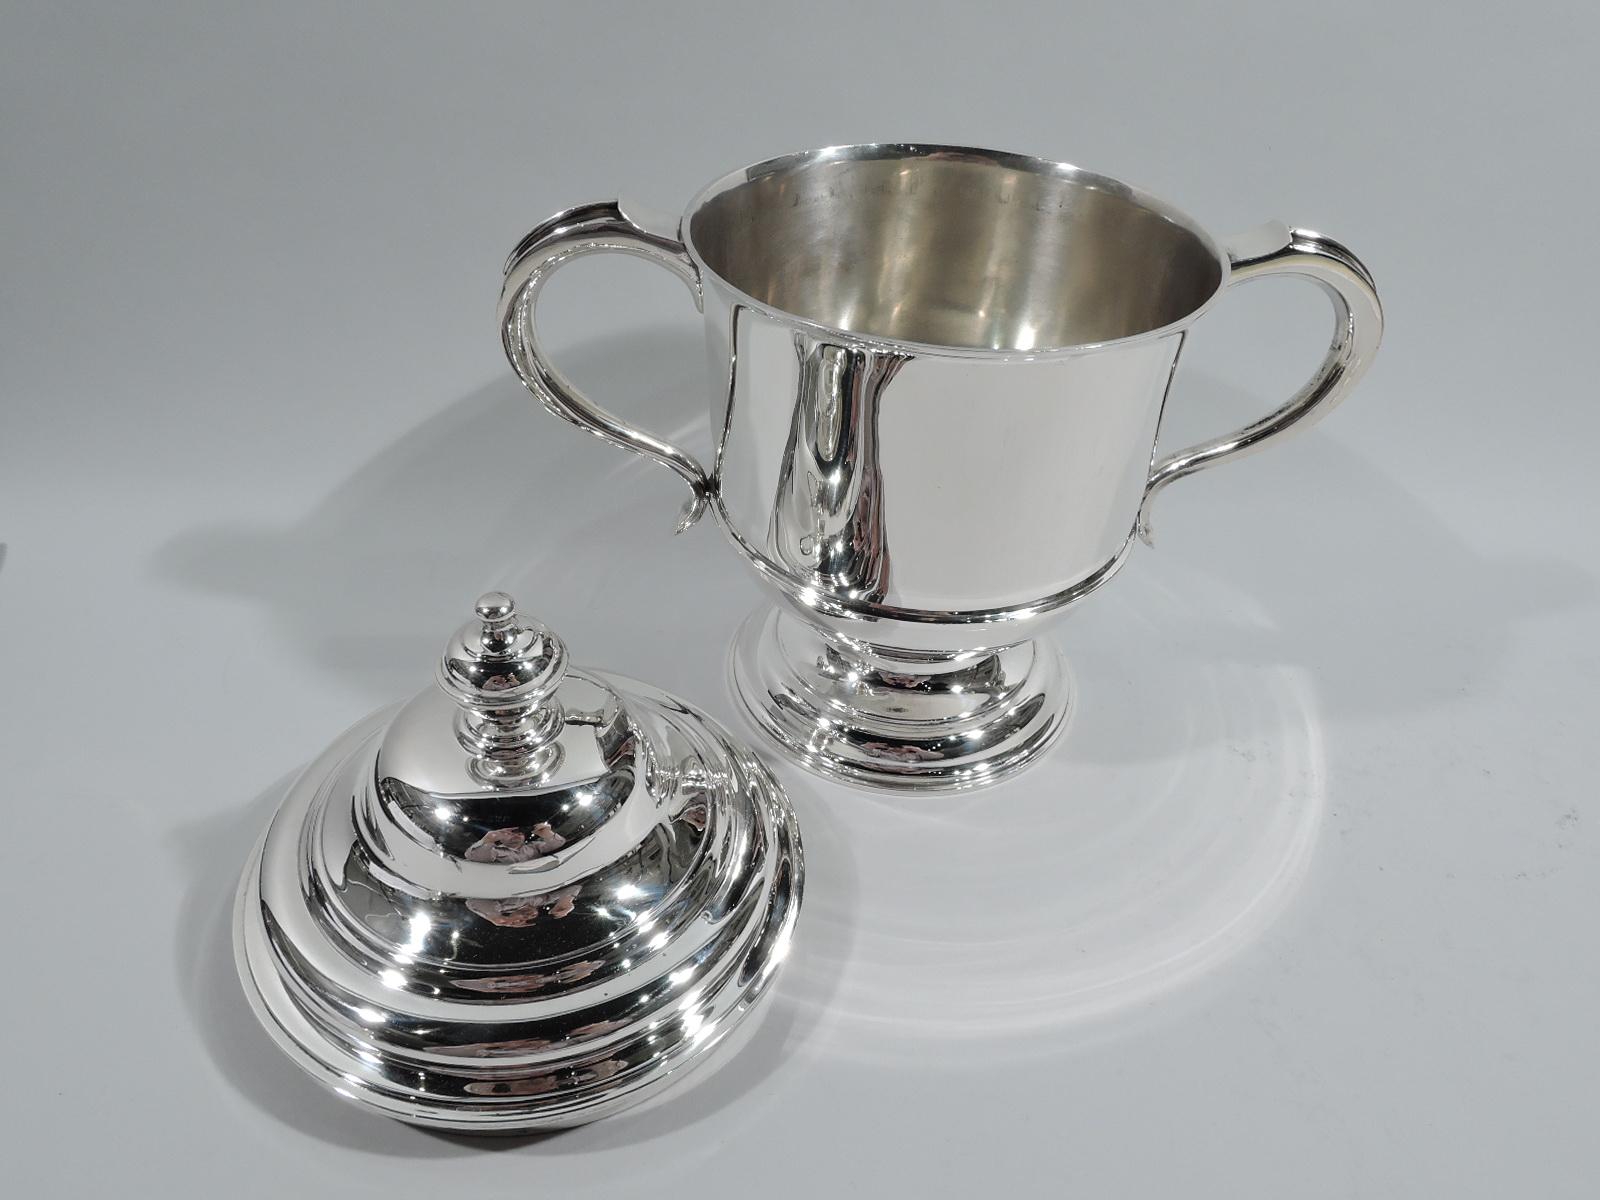 George V sterling silver covered urn. Made by Lionel Alfred Crichton in London in 1927. Girdled bowl on stepped and domed foot; capped s-scroll side handles. Cover double-domed with vasiform finial. Traditional Classical form with lots of room for